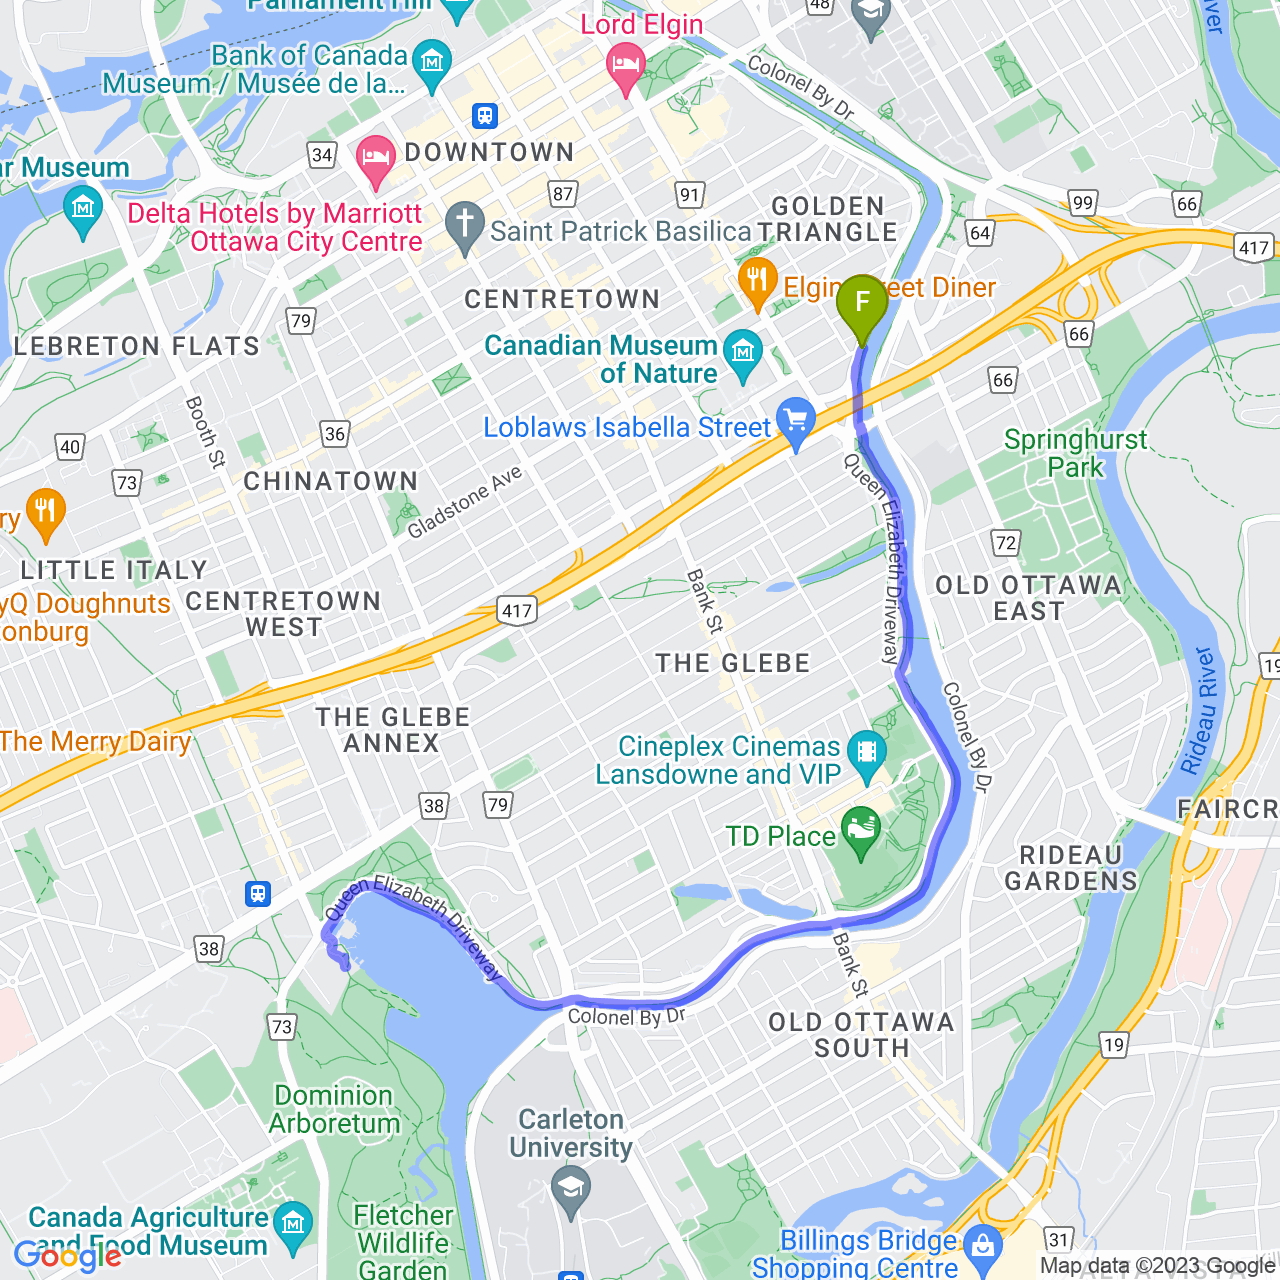 map of Chill winter ride by the Canal